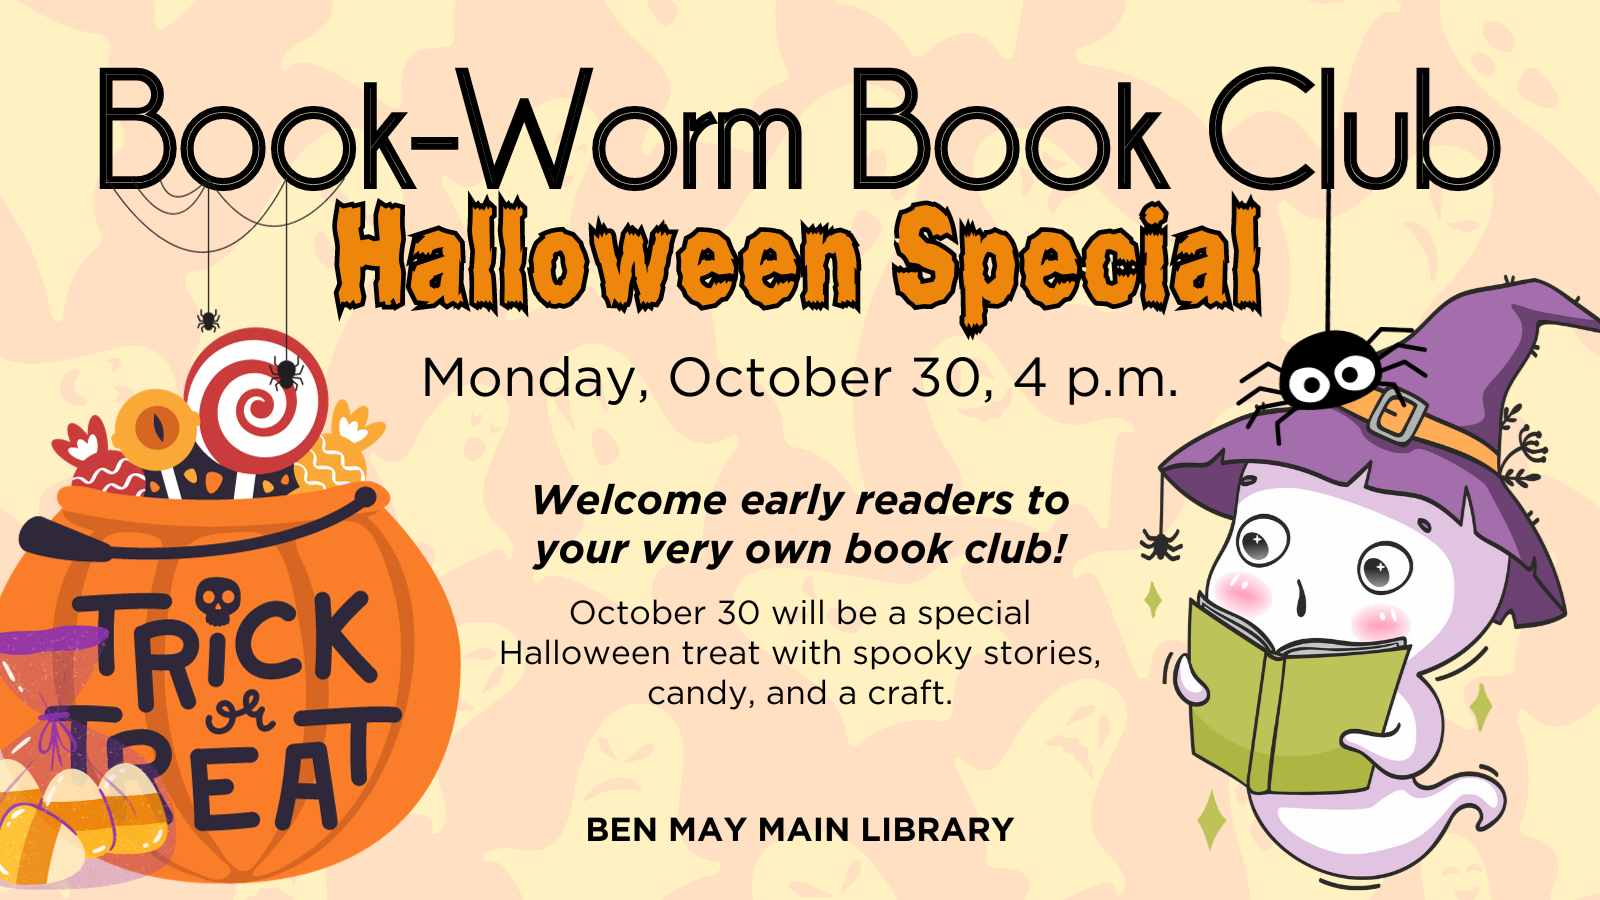 Book-worm Book Club Halloween Special